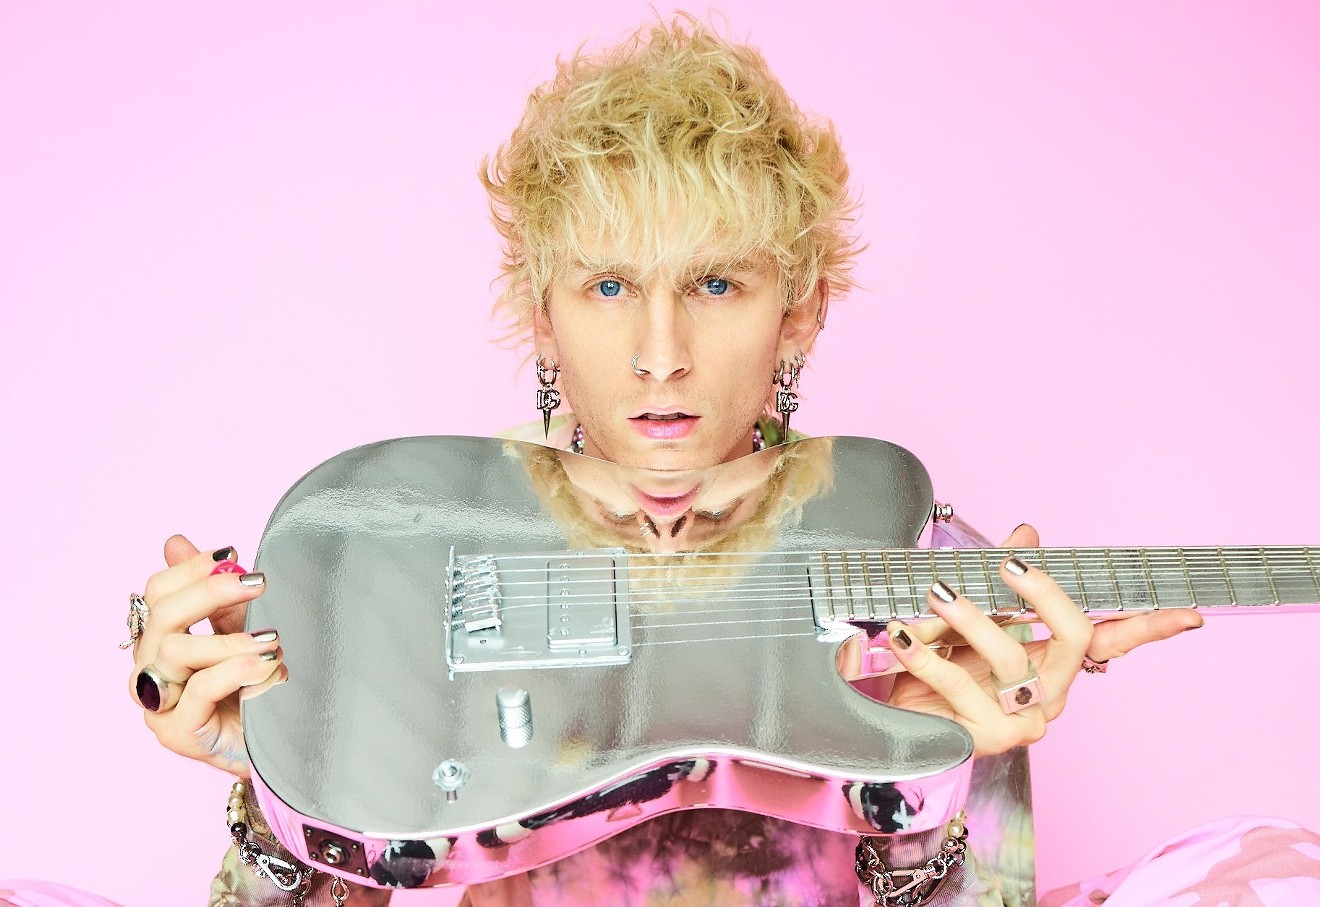 Machine Gun Kelly is scheduled to perform on Monday, July 11, at Footprint Center.